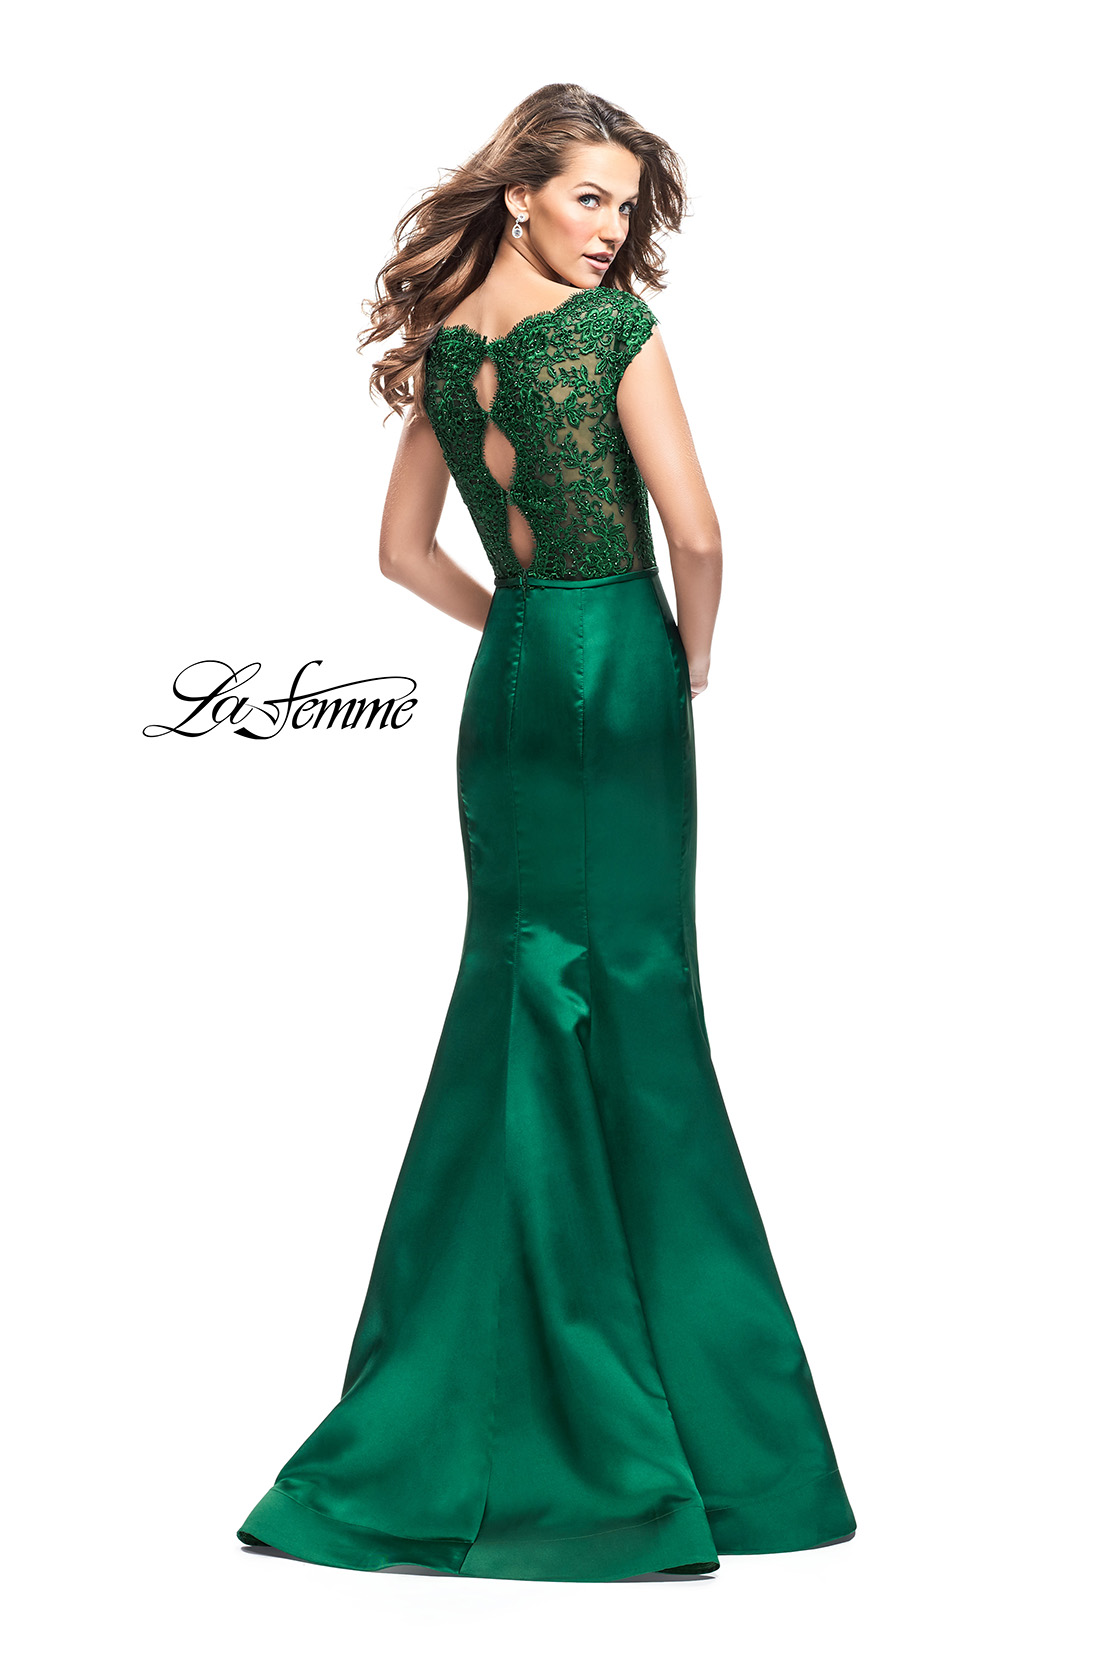 GREEN with Envy - Our Favorite Green Gowns! | La Femme